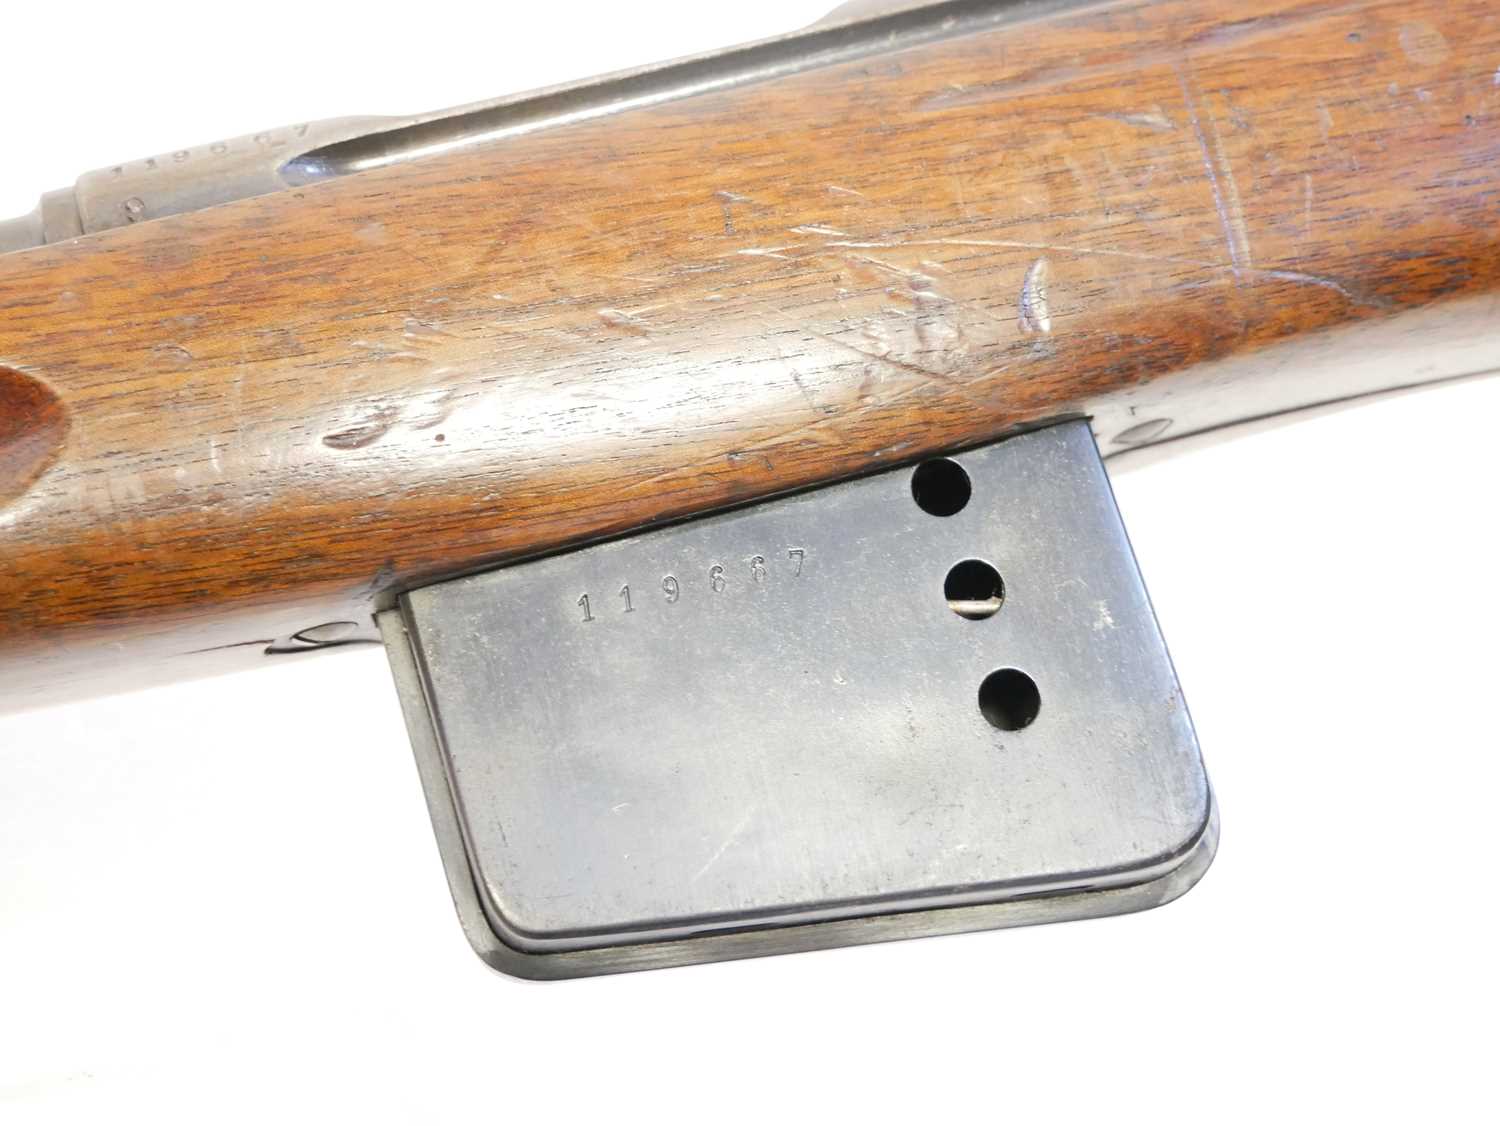 Schmidt Rubin 1889 7.5x 53.5mm straight pull rifle, matching serial numbers 119667, with 30" barrel, - Image 16 of 20